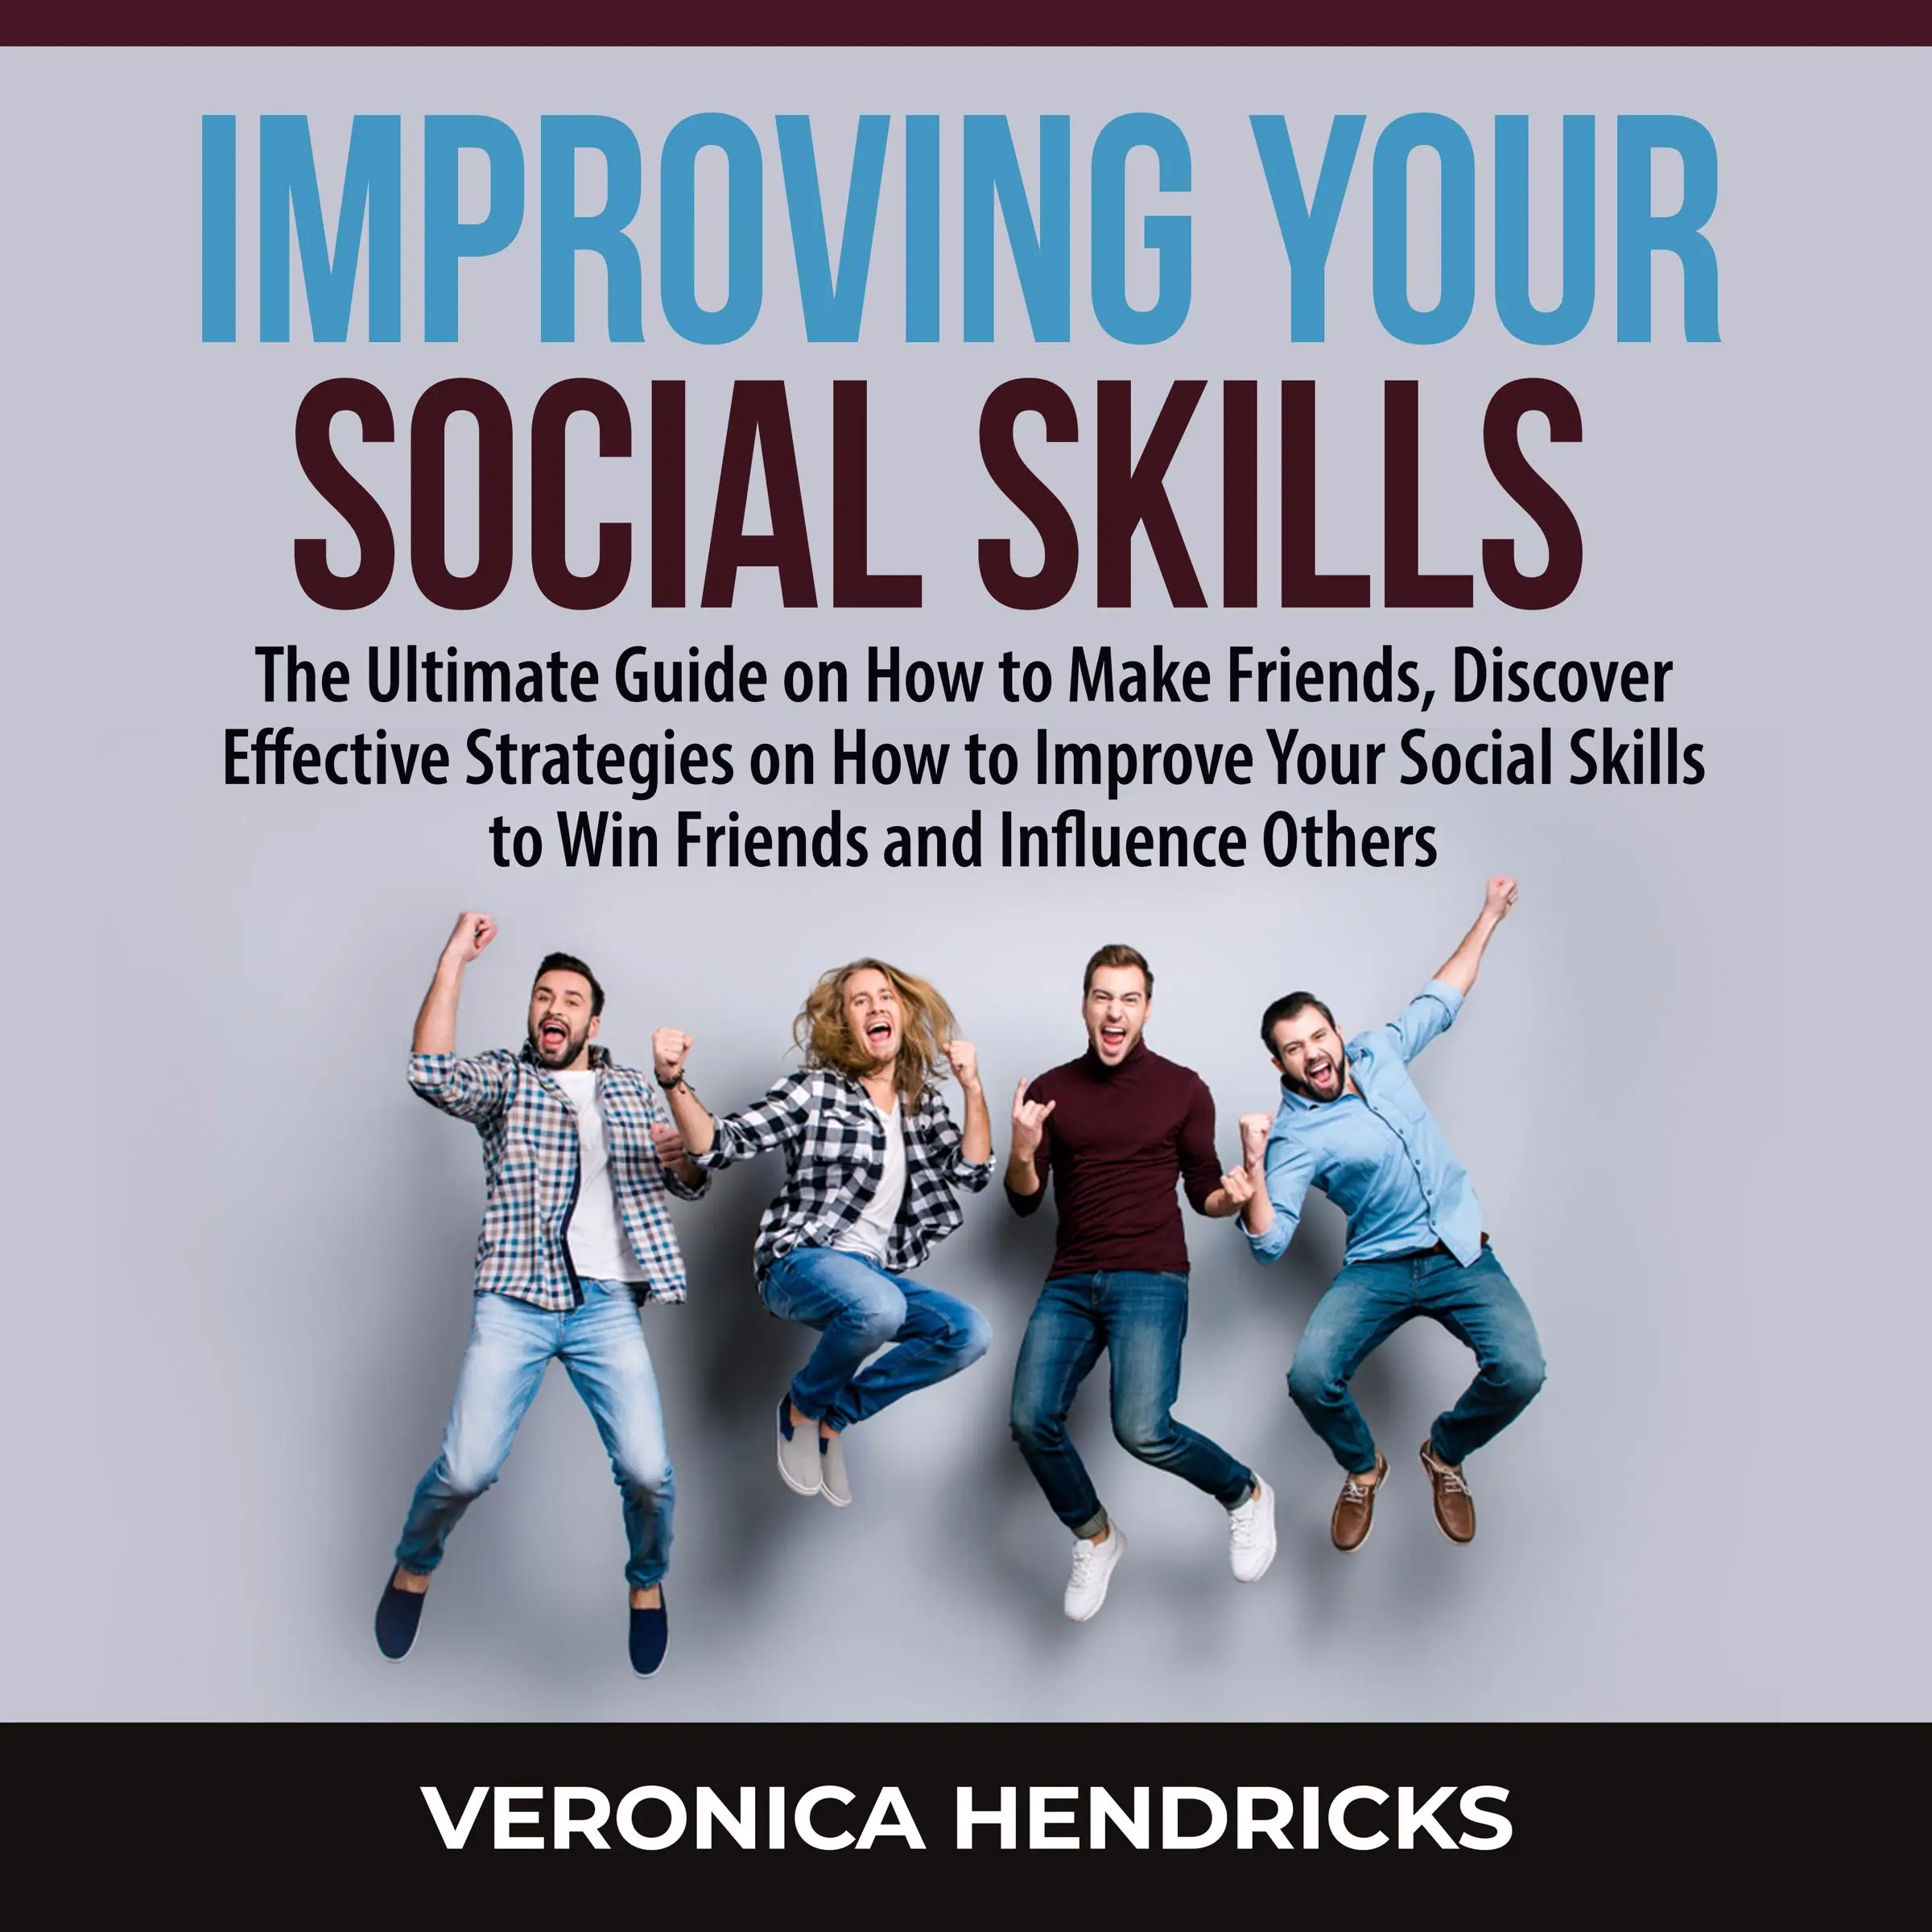 Improving Your Social Skills: The Ultimate Guide on How to Make Friends, Discover Effective Strategies on How to Improve Your Social Skills to Win Friends and Influence Others Audiobook by Veronica Hendricks